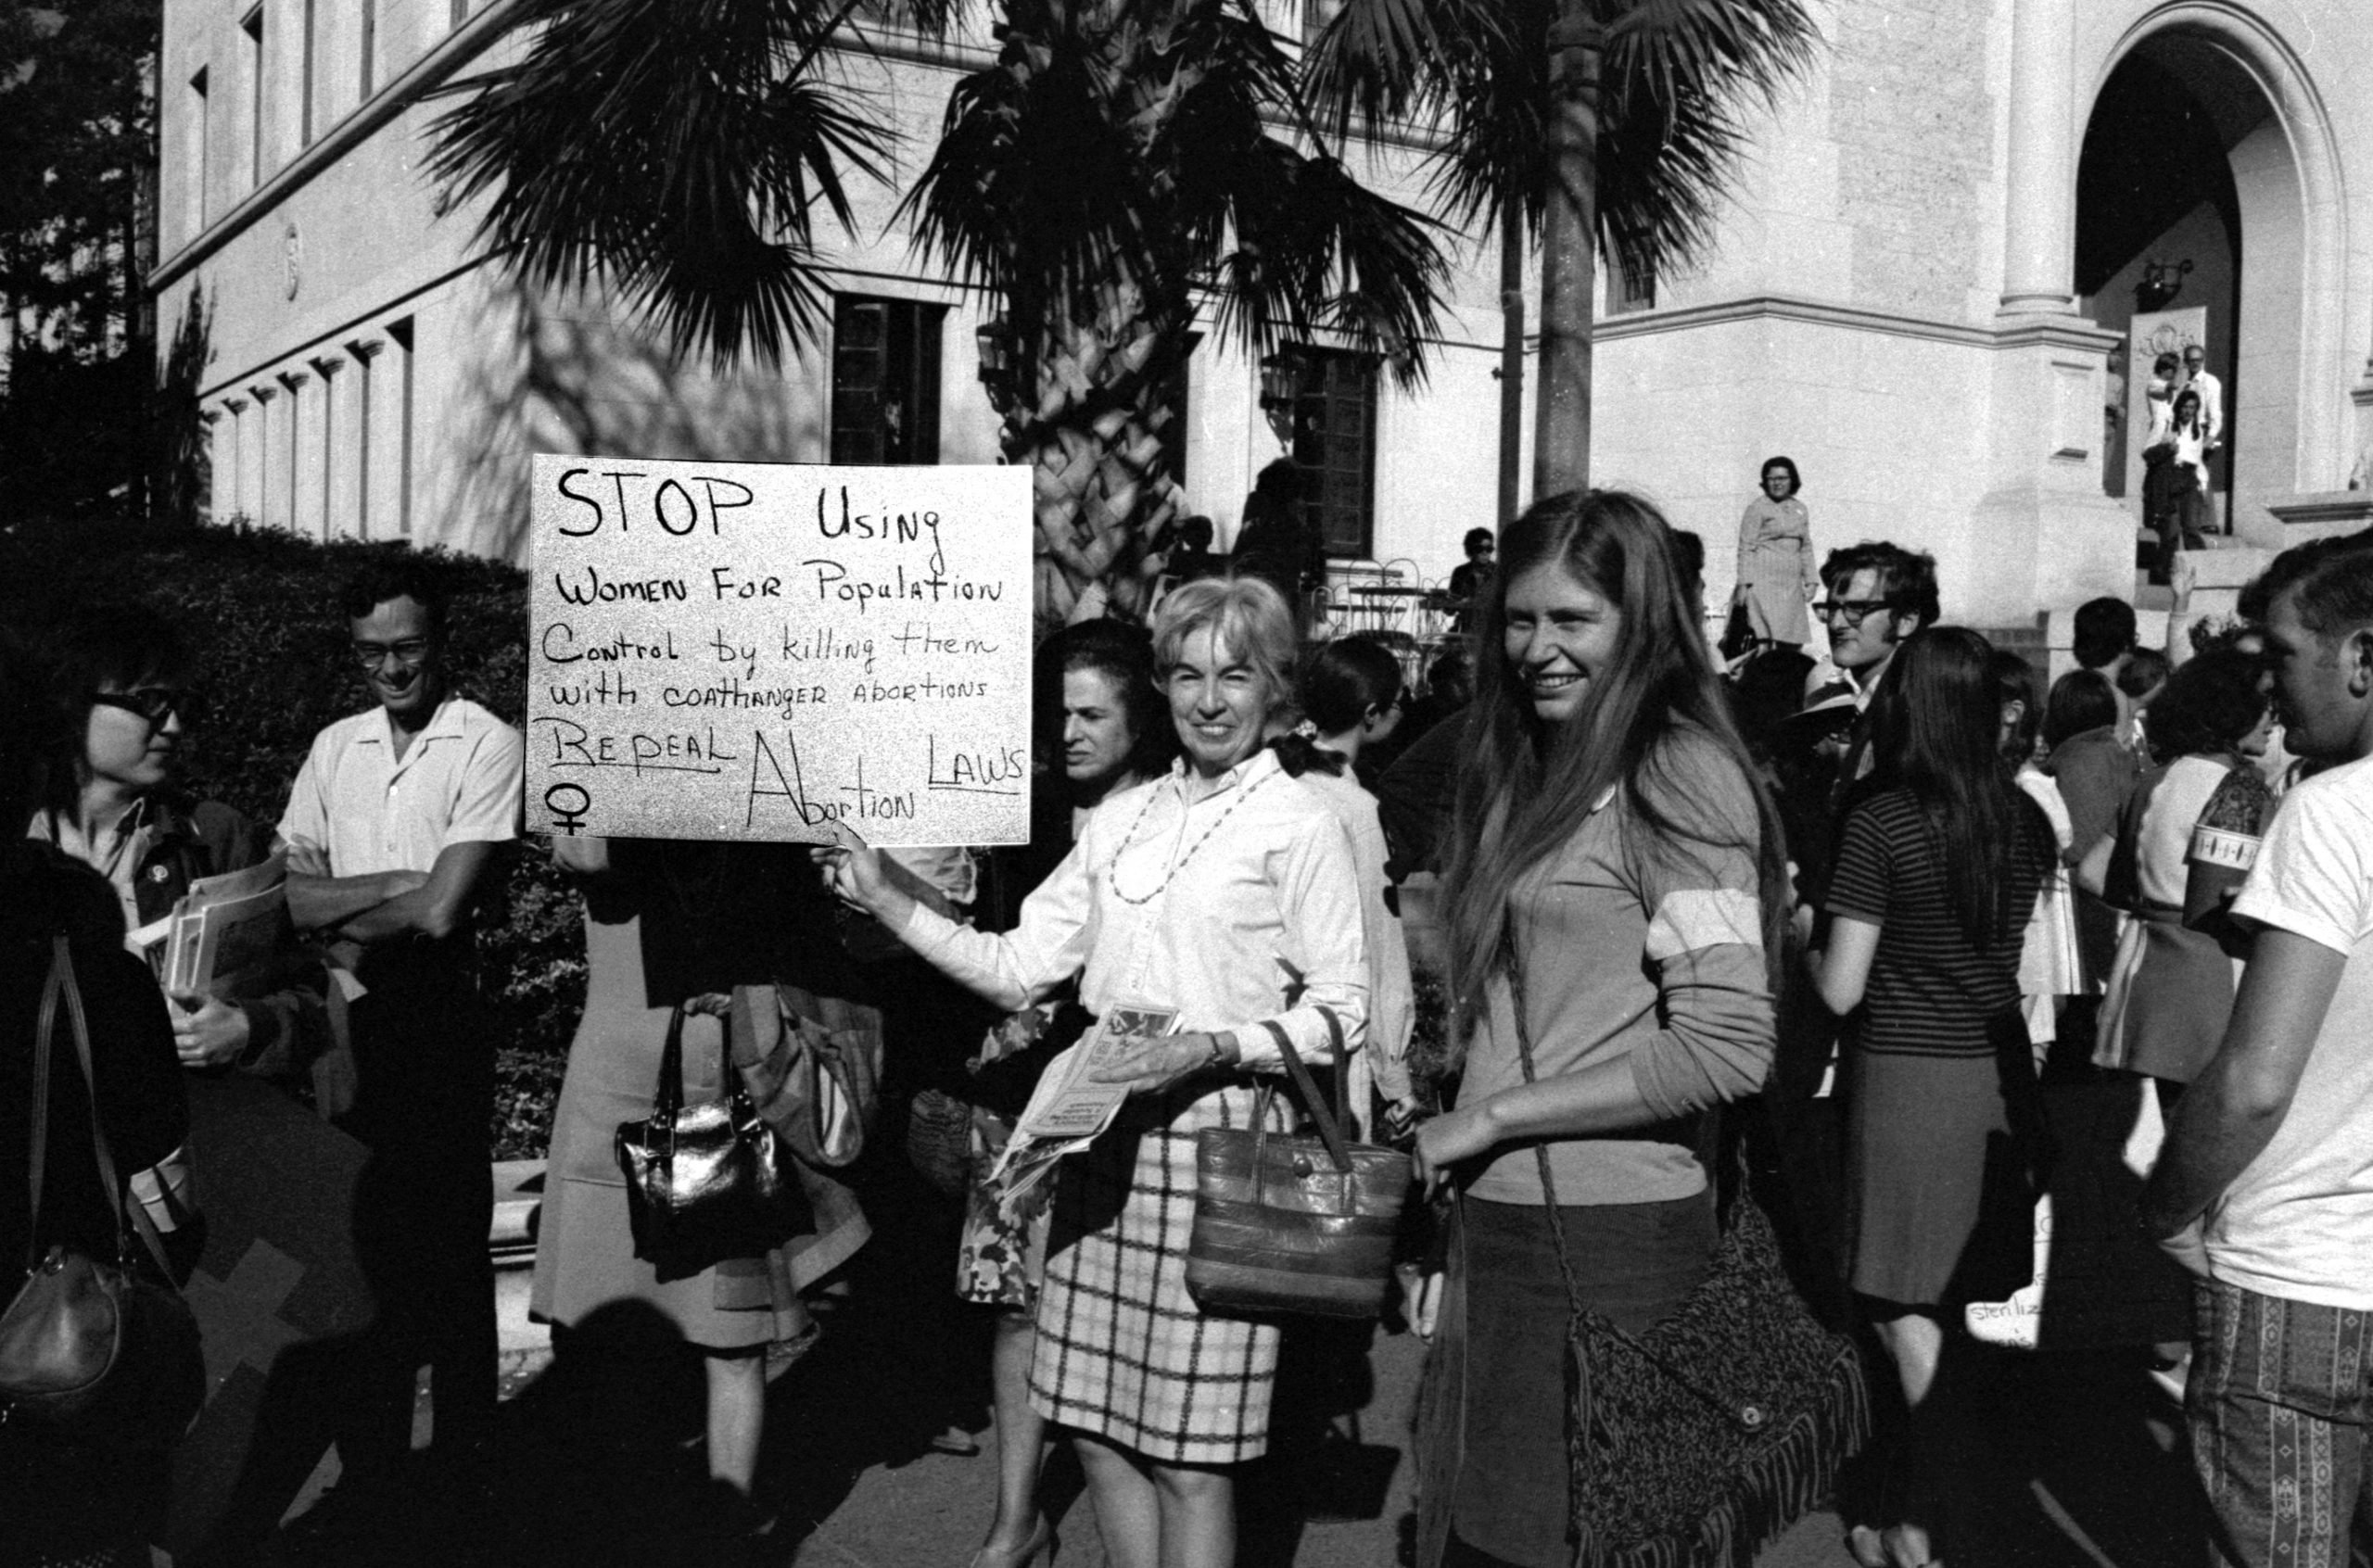 In a black & white photo, women demonstrate in favor of repealing abortion legislation in Texas. In the foreground, one woman holds a handwritten sign which reads "Stop using women for population control by killing them with coathanger abortions. Repeal Abortion Laws"